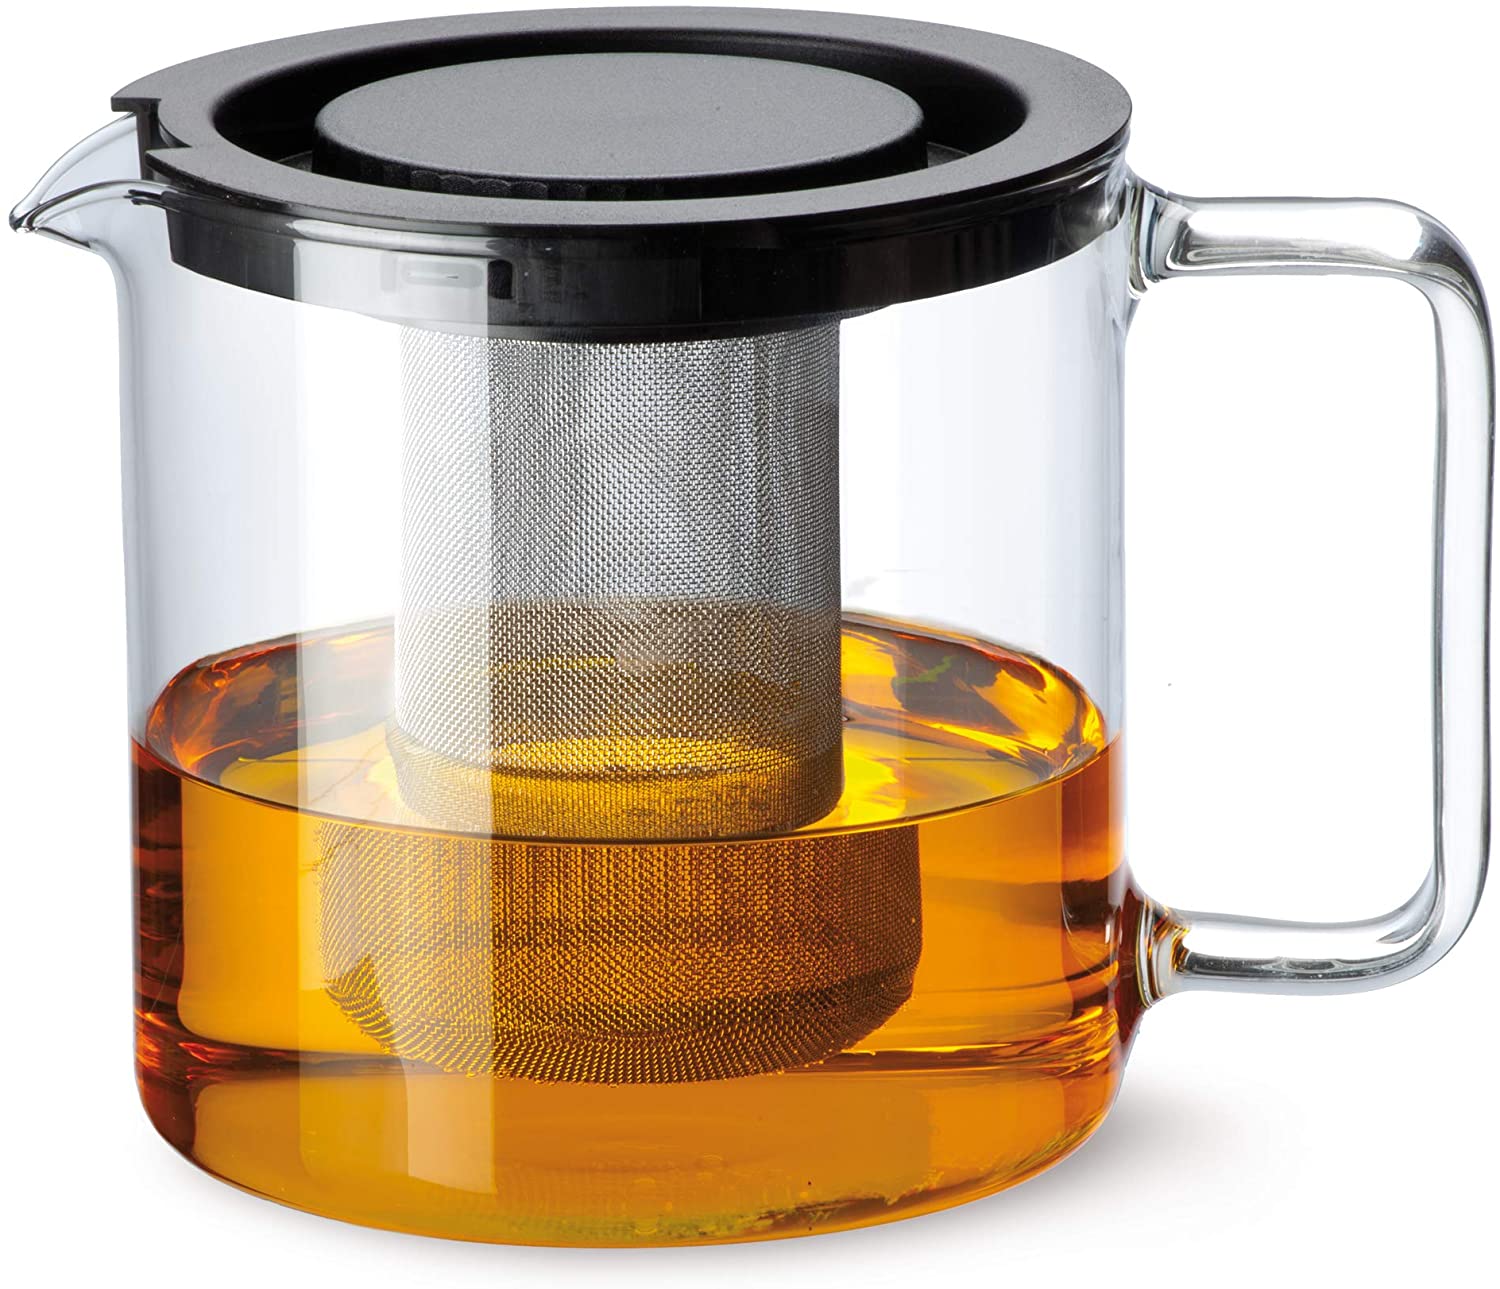 Bohemia Cristal Simax 093 006 005 Teapot Cylindrical 1.3 L Heat-Resistant Borosilicate Glass with Plastic Lid and Metal Strainer